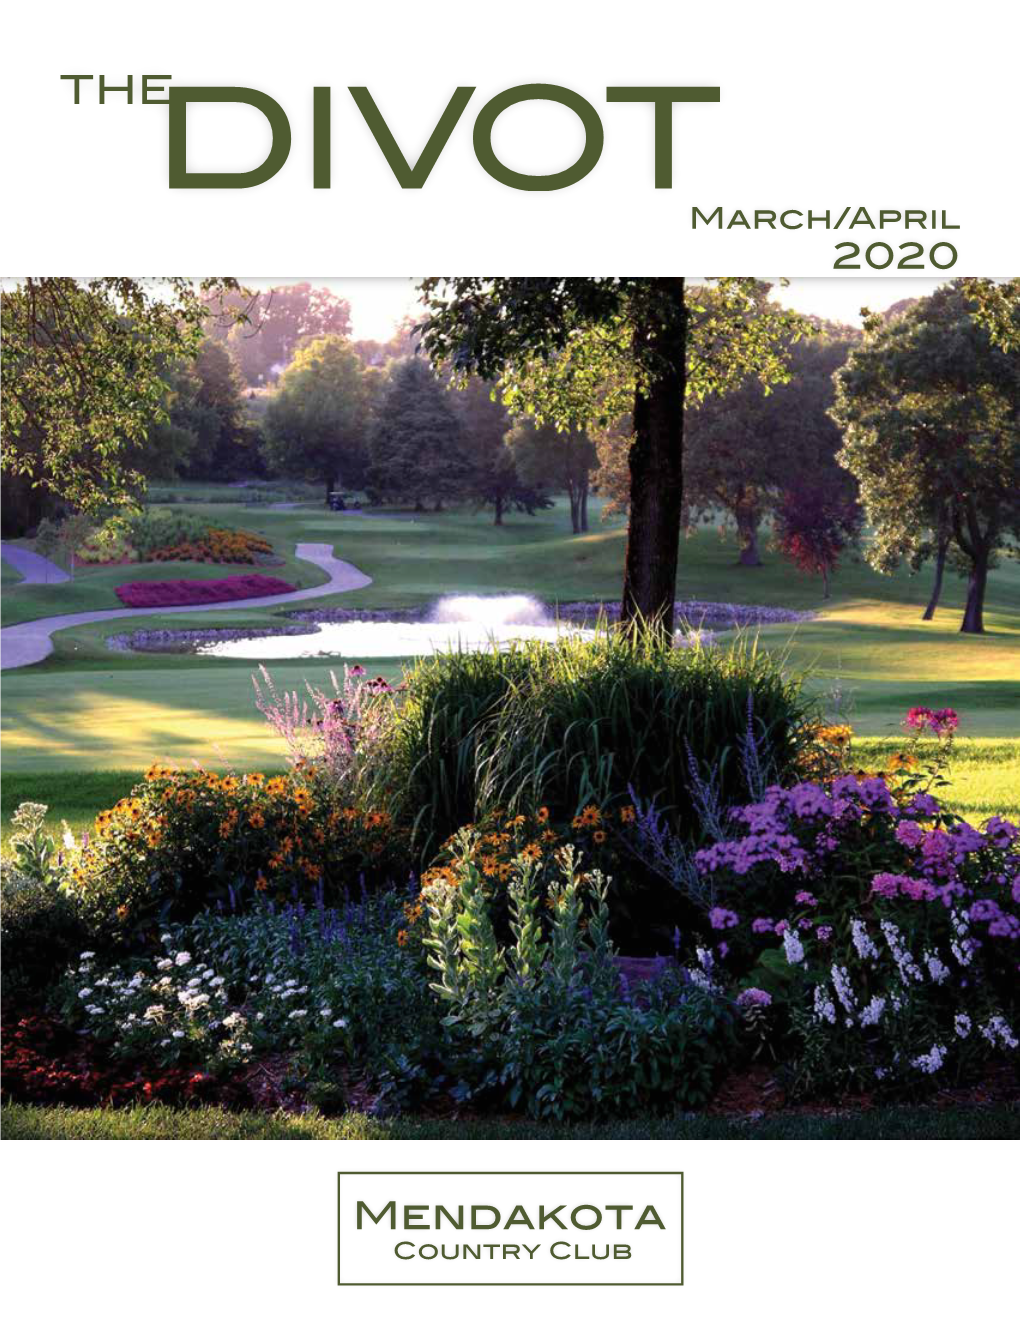 March/April 2020 Page 2 the Divot March/April 2020 All Ofyousoon,Besafe,Stayhealthy, Andsmile